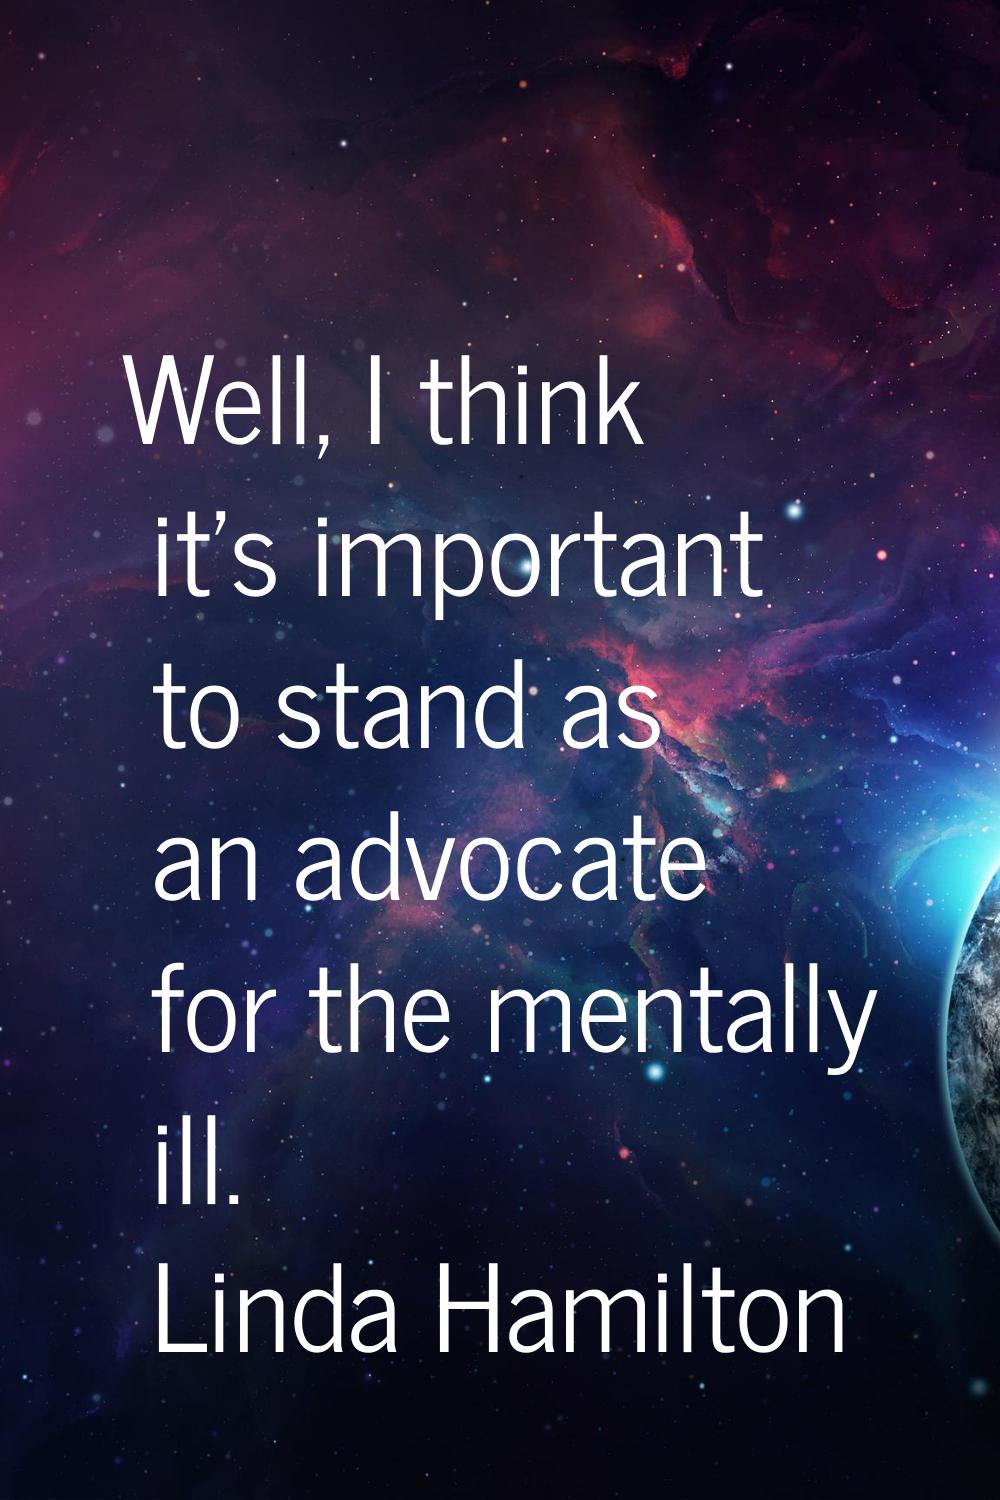 Well, I think it's important to stand as an advocate for the mentally ill.